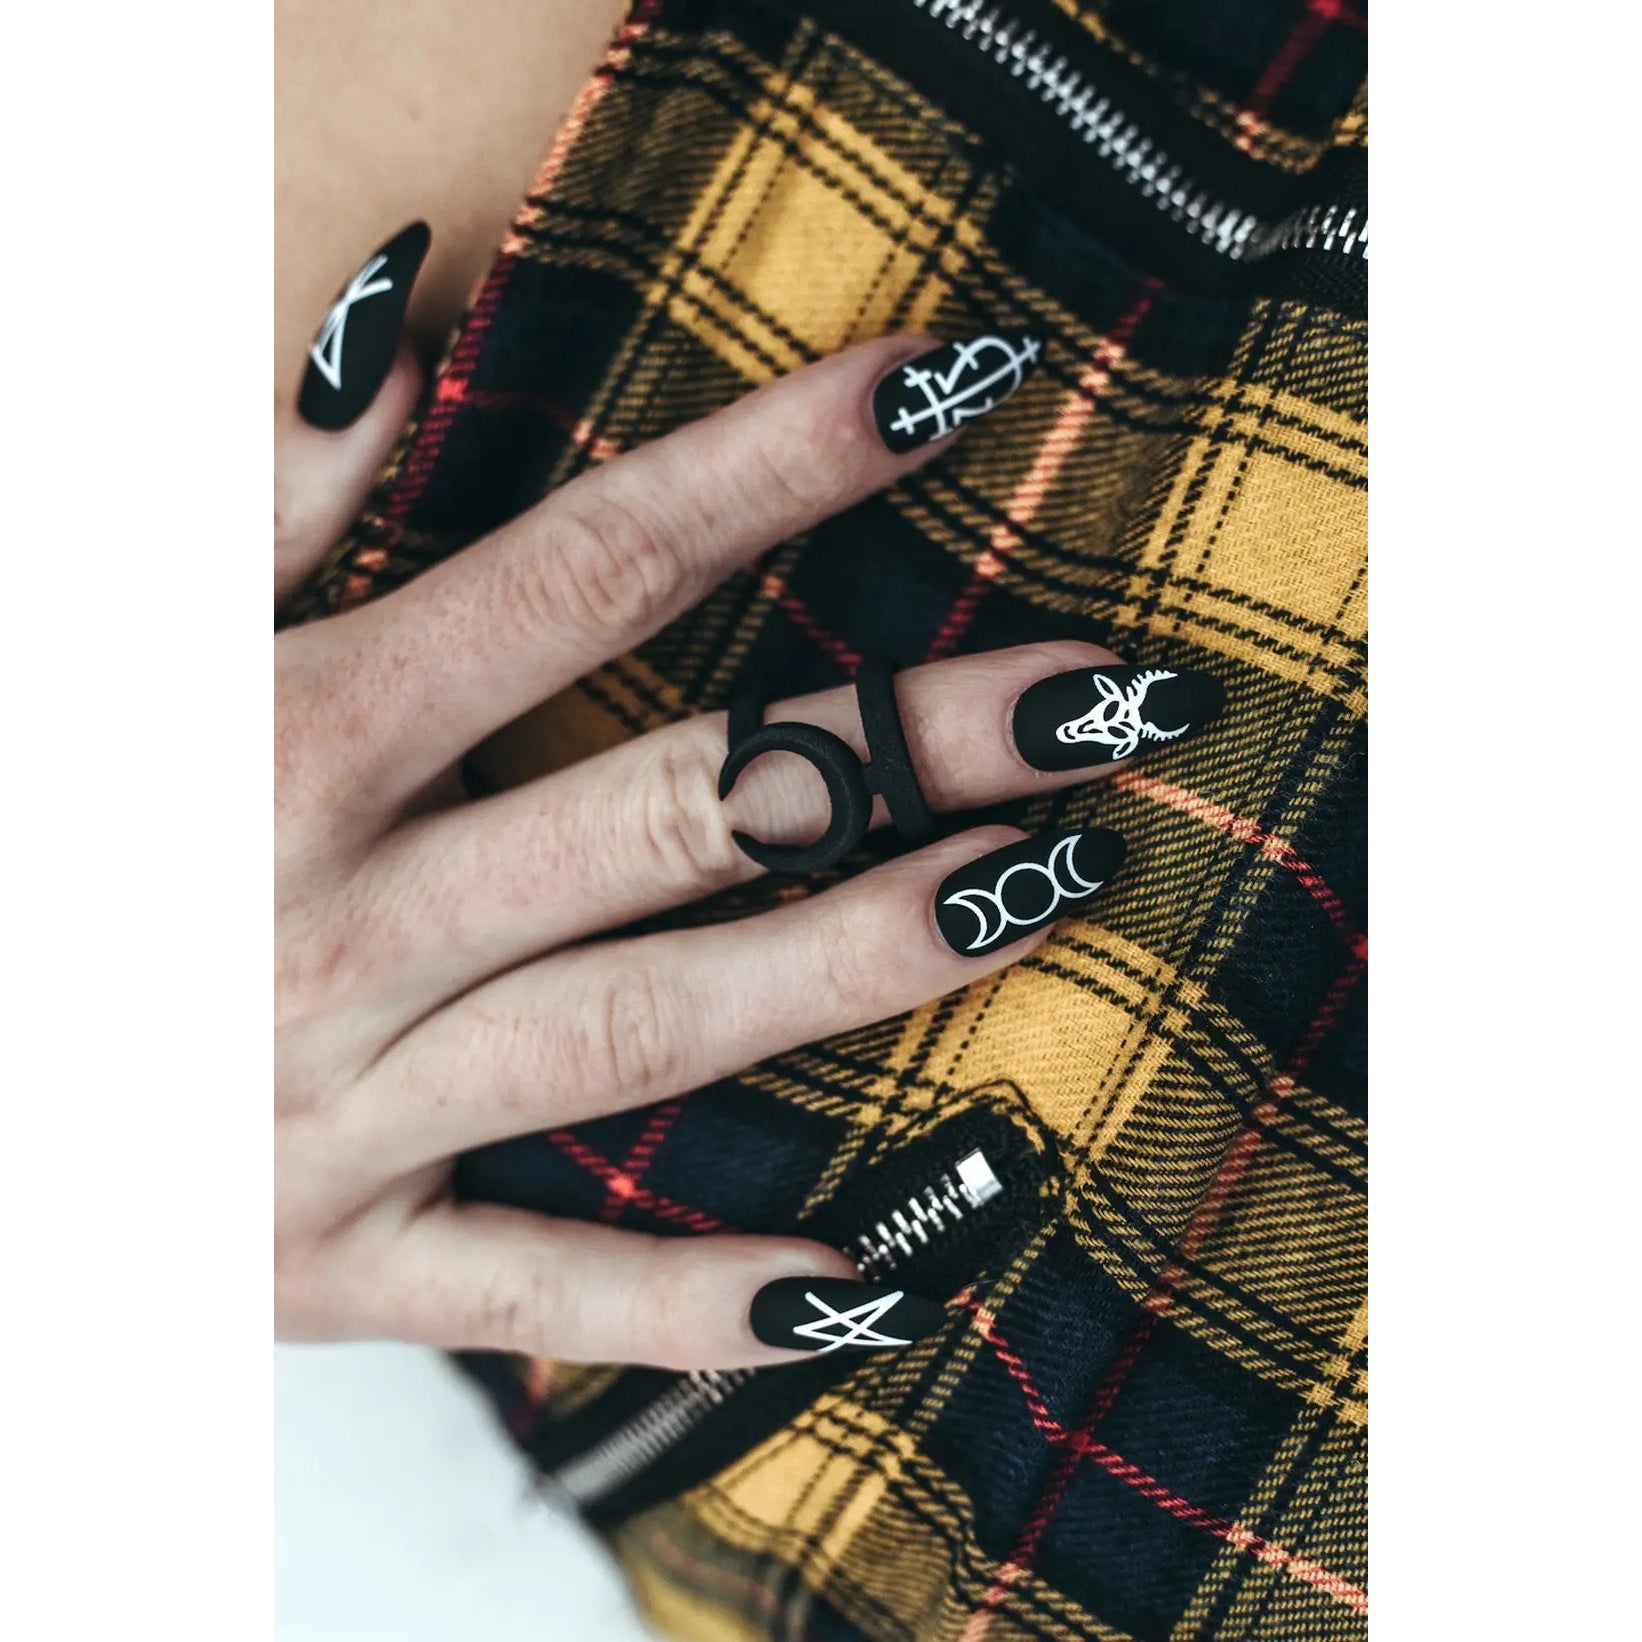 Bad Witch Nailz | Press On Nail Kit Includes 24 Nails